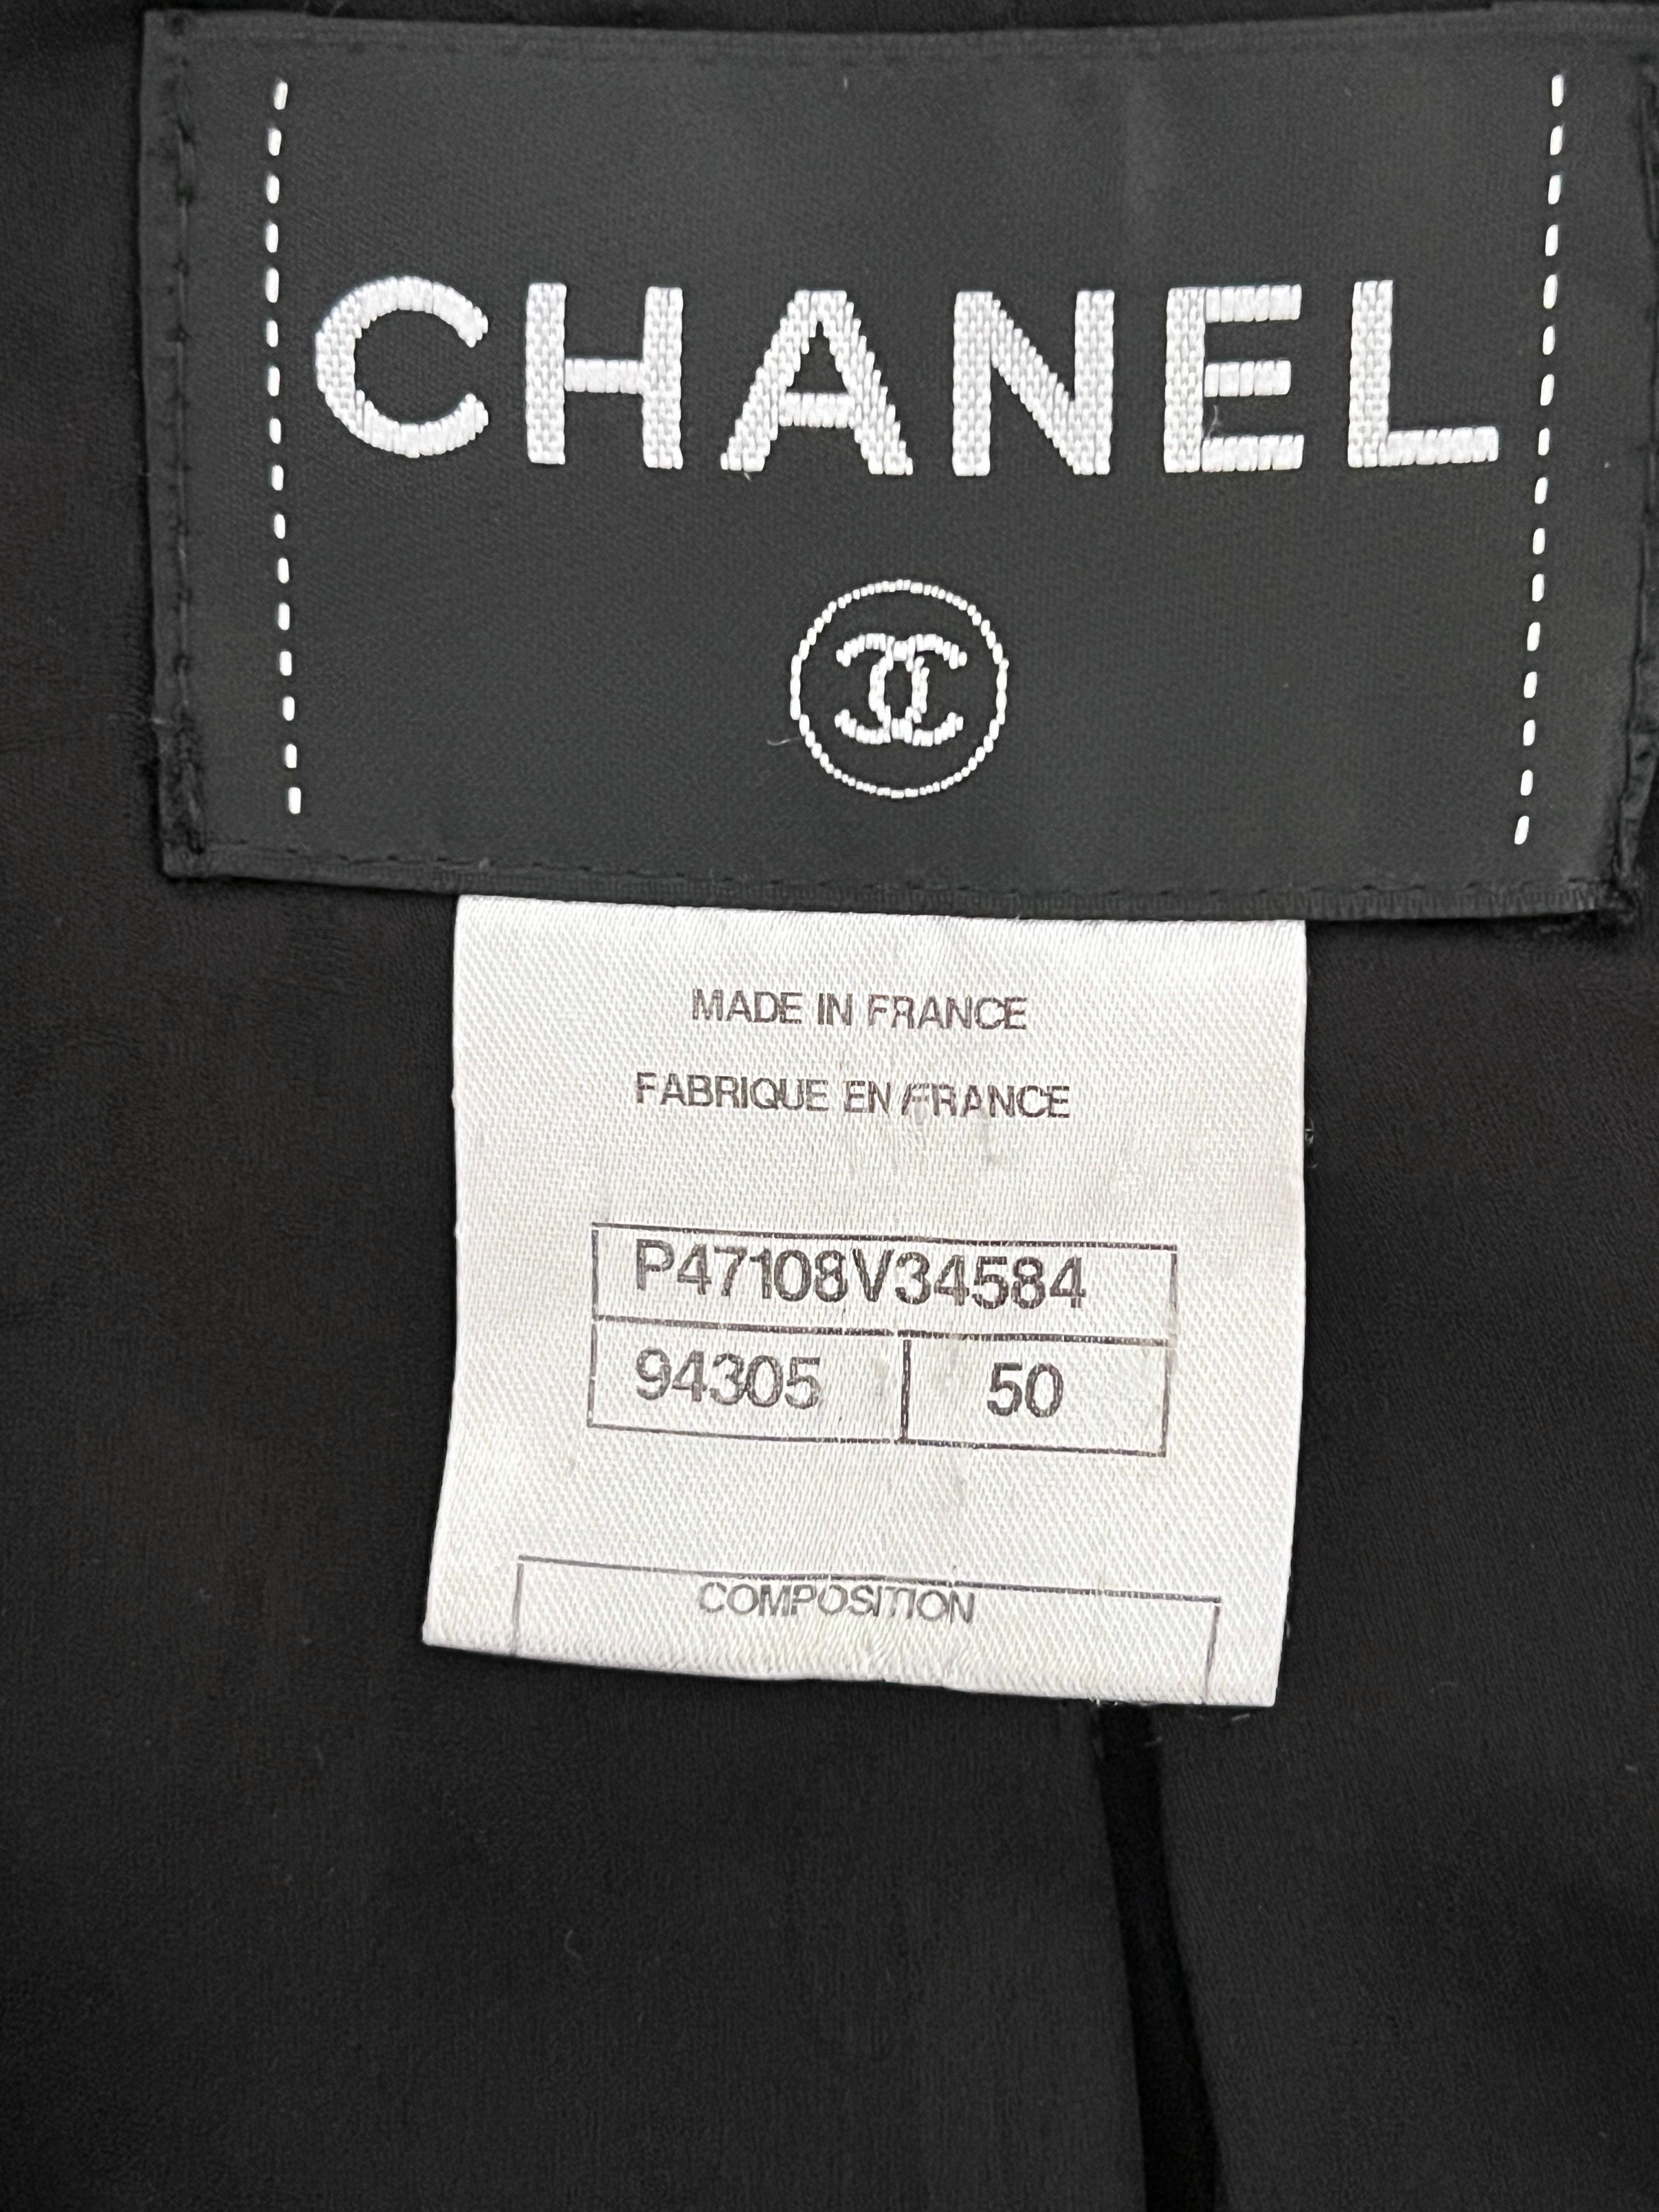 Chanel Most Coveted Kira Knightley Style Black Tweed Jacket 10